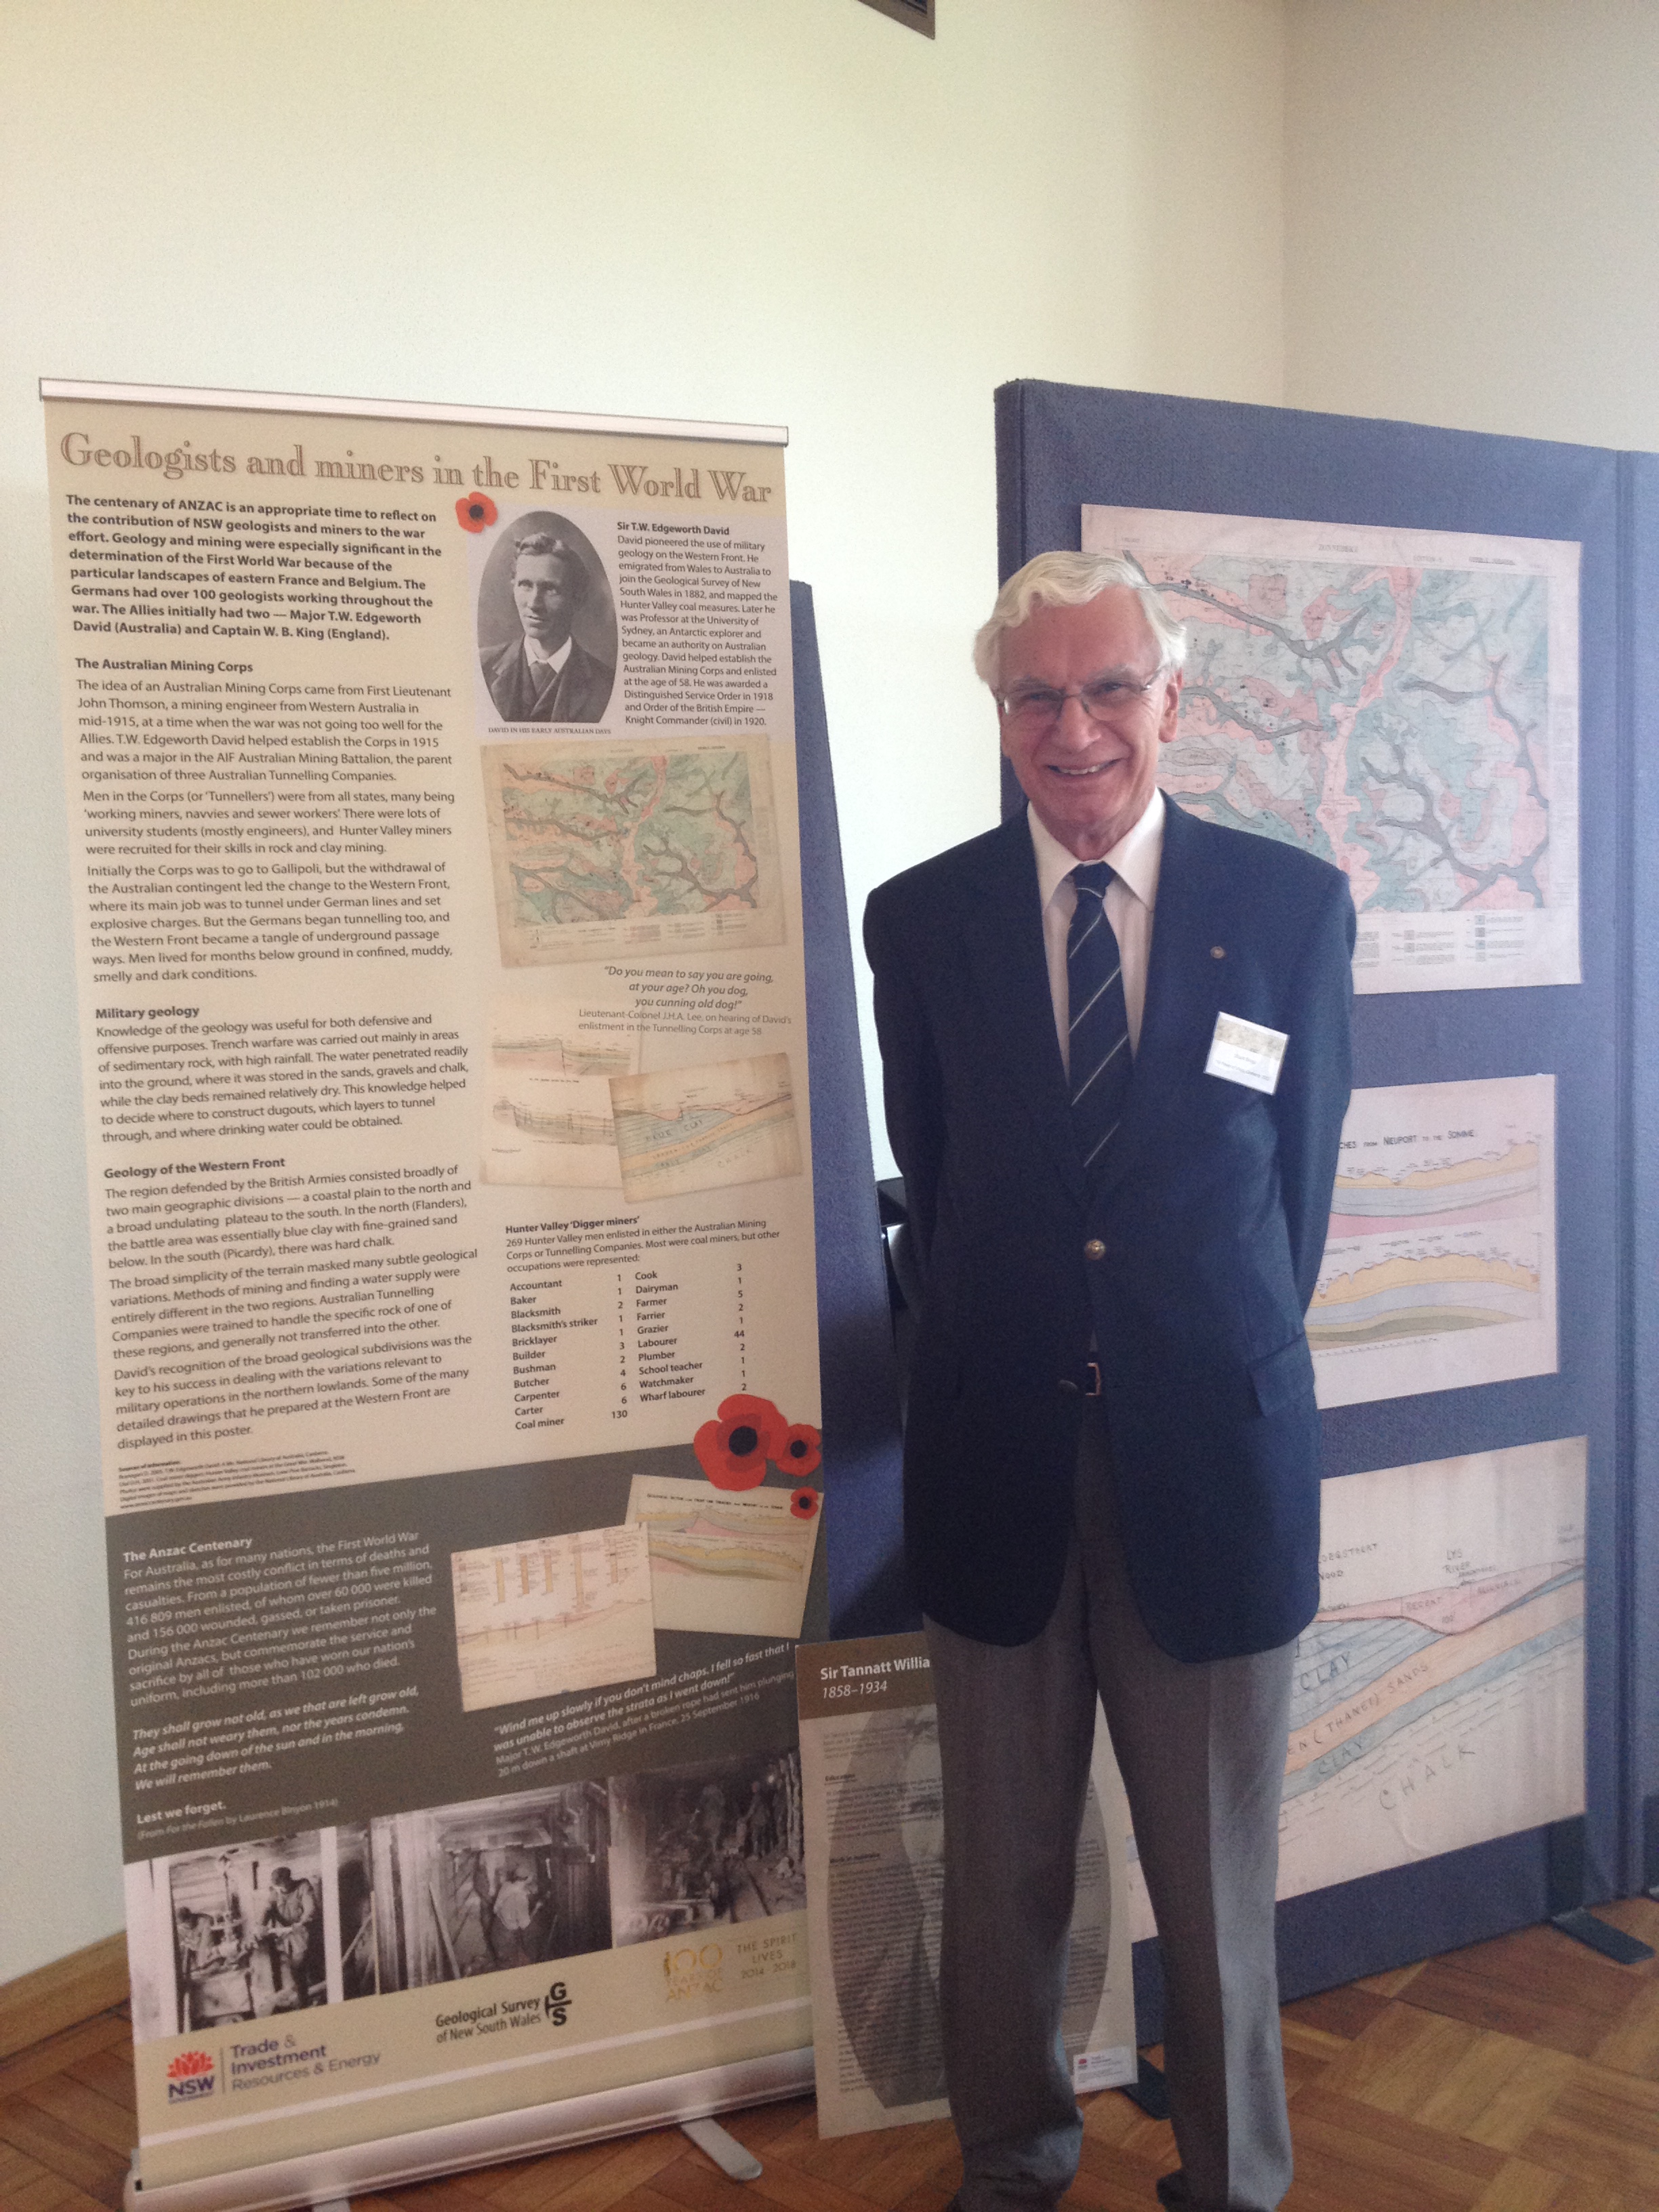 Dr Stuart Braga standing in front of the Geologist and Miners of the First World War display that included maps drawn by Edgeworth David